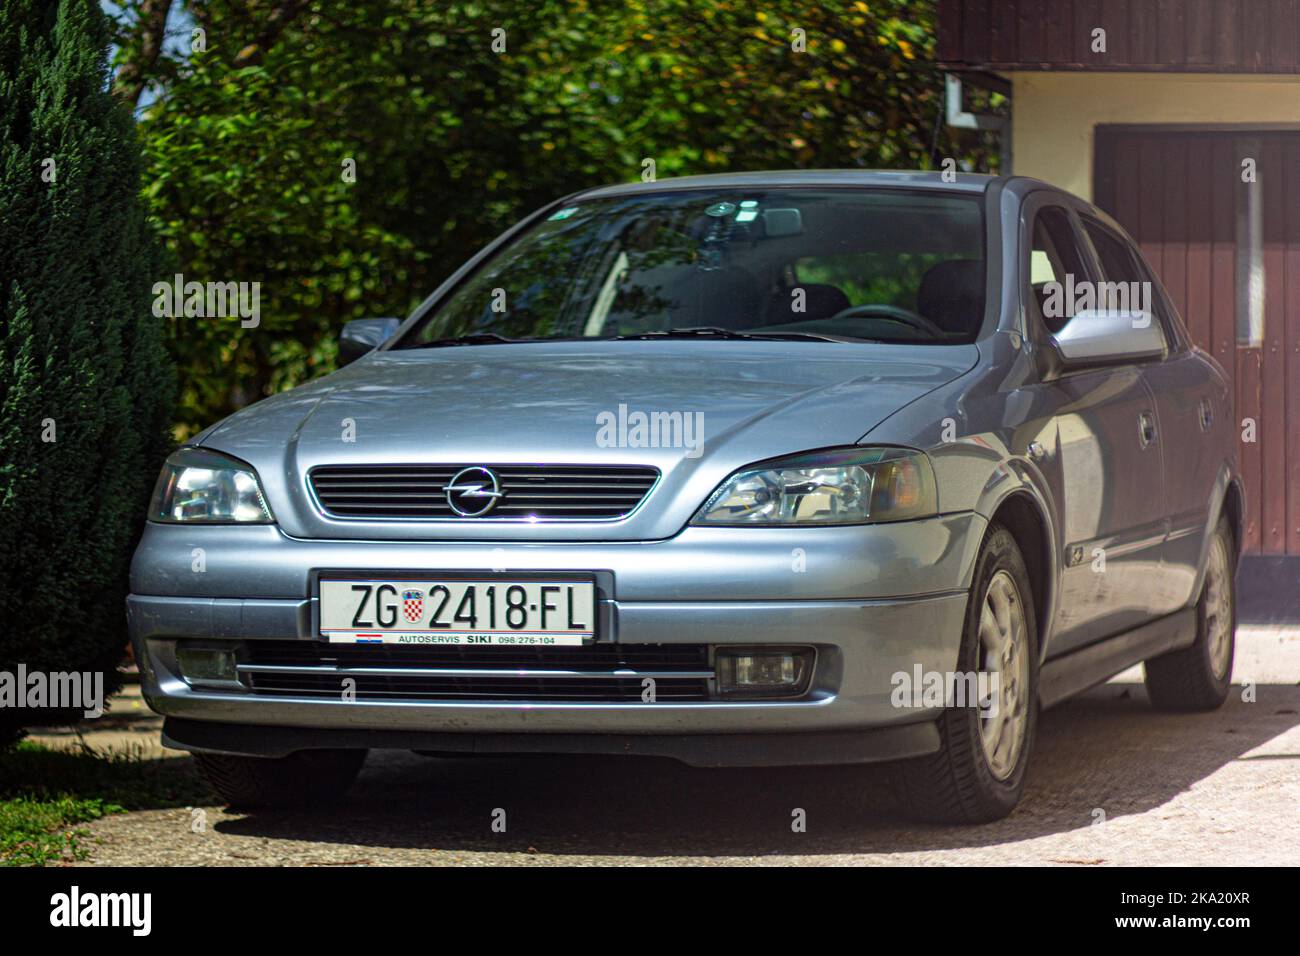 Silver Blue 2002 Opel Vauxhall Astra parked in front of home garage on sunny day exterior Stock Photo